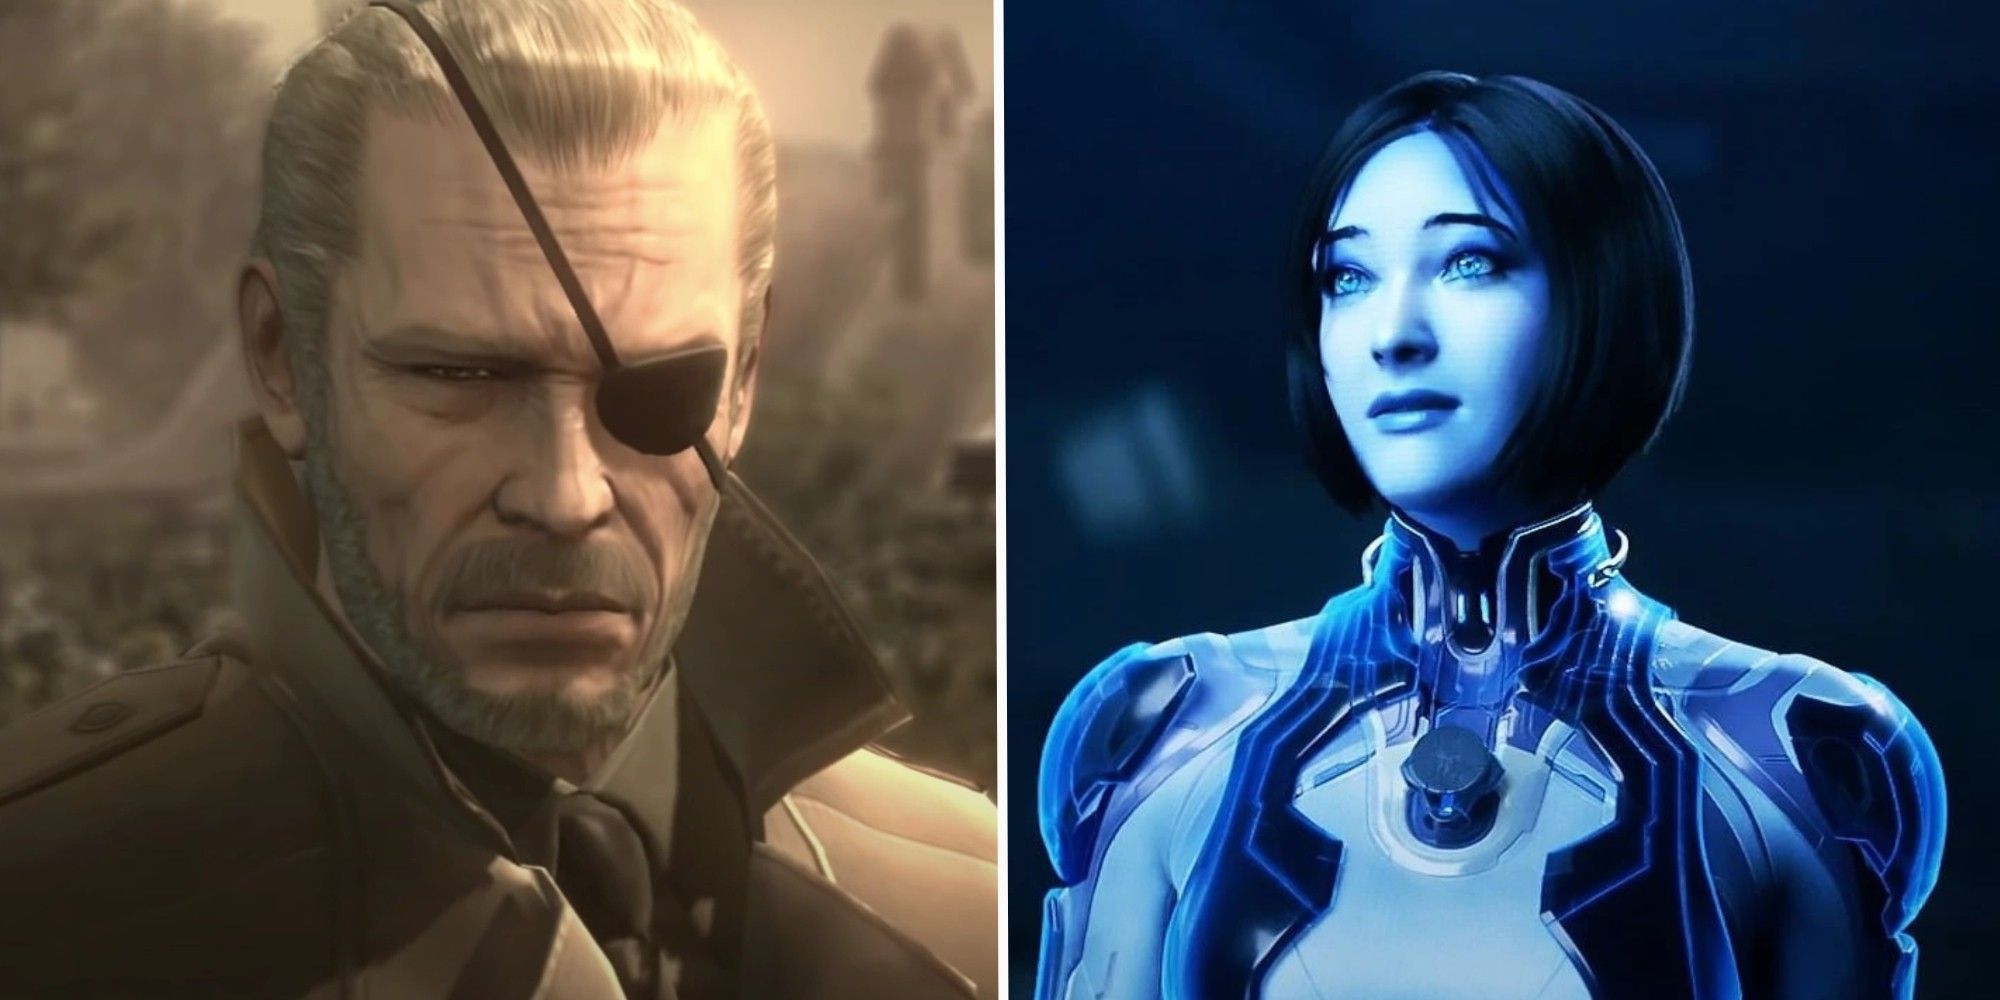 Big Boss giving a resigned stare, and Cortana staring confidently in the video games Metal Gear Solid 4 and Halo 5 respectfully